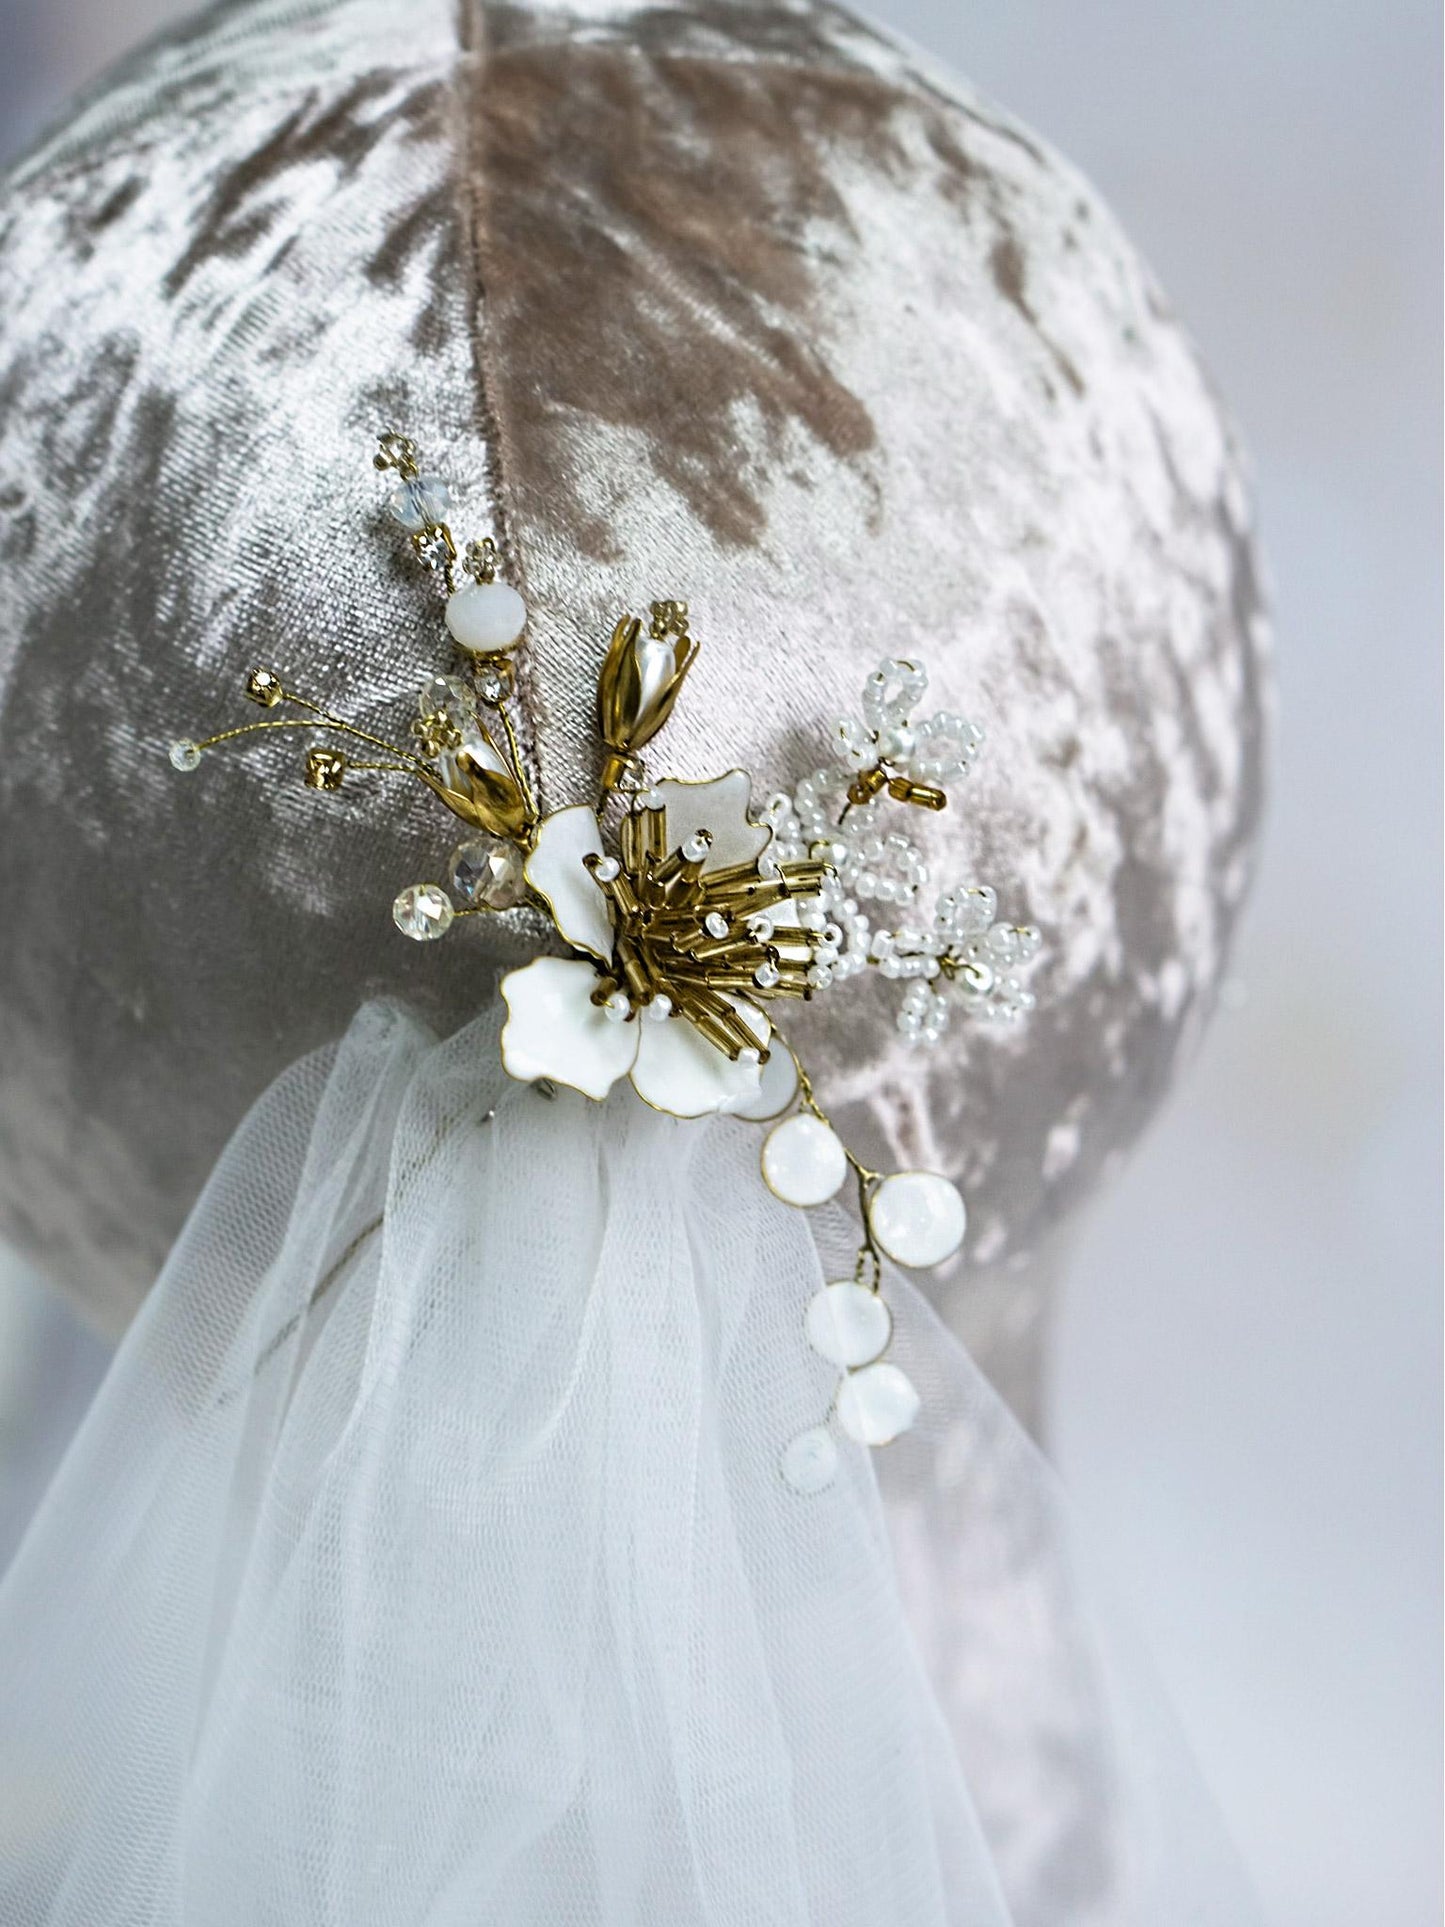 Bride's updo with gold flower hair pin featuring spikelets made of crystal beads